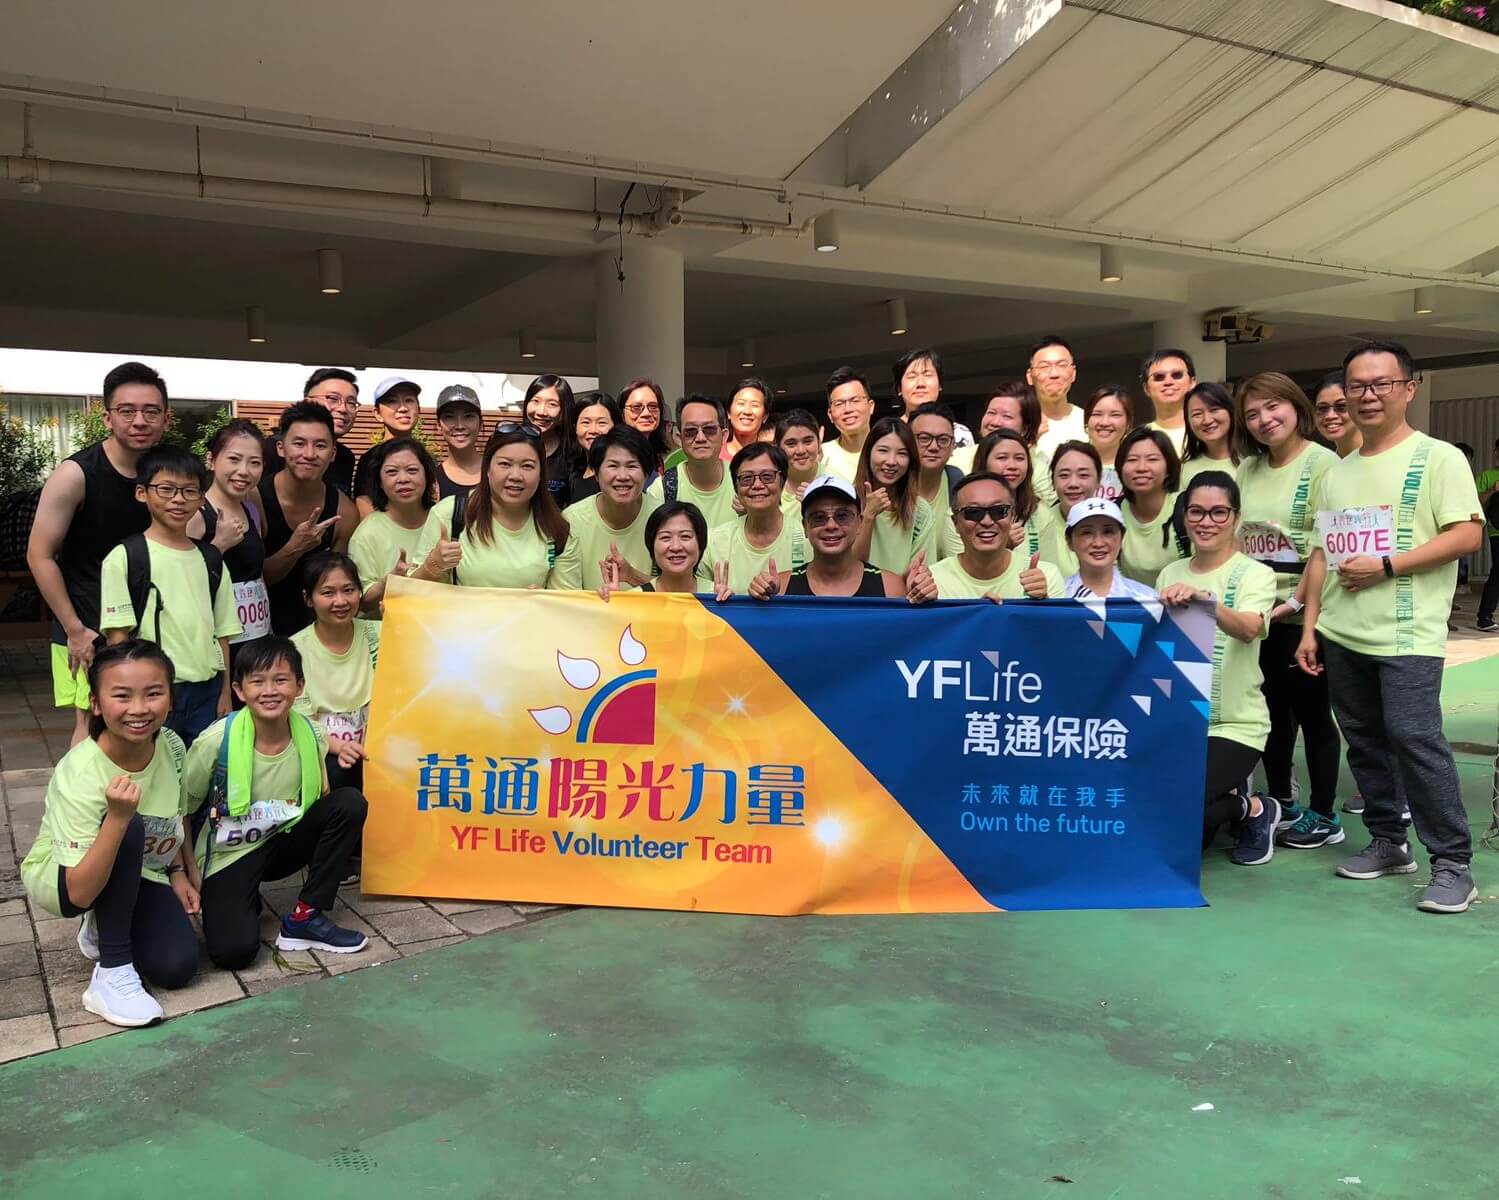 YF Life Volunteer Team fielded a big turnout for the “AVS Charity Run & Walk for Volunteering 2019”, helping to spread the spirit of volunteerism in the community. 